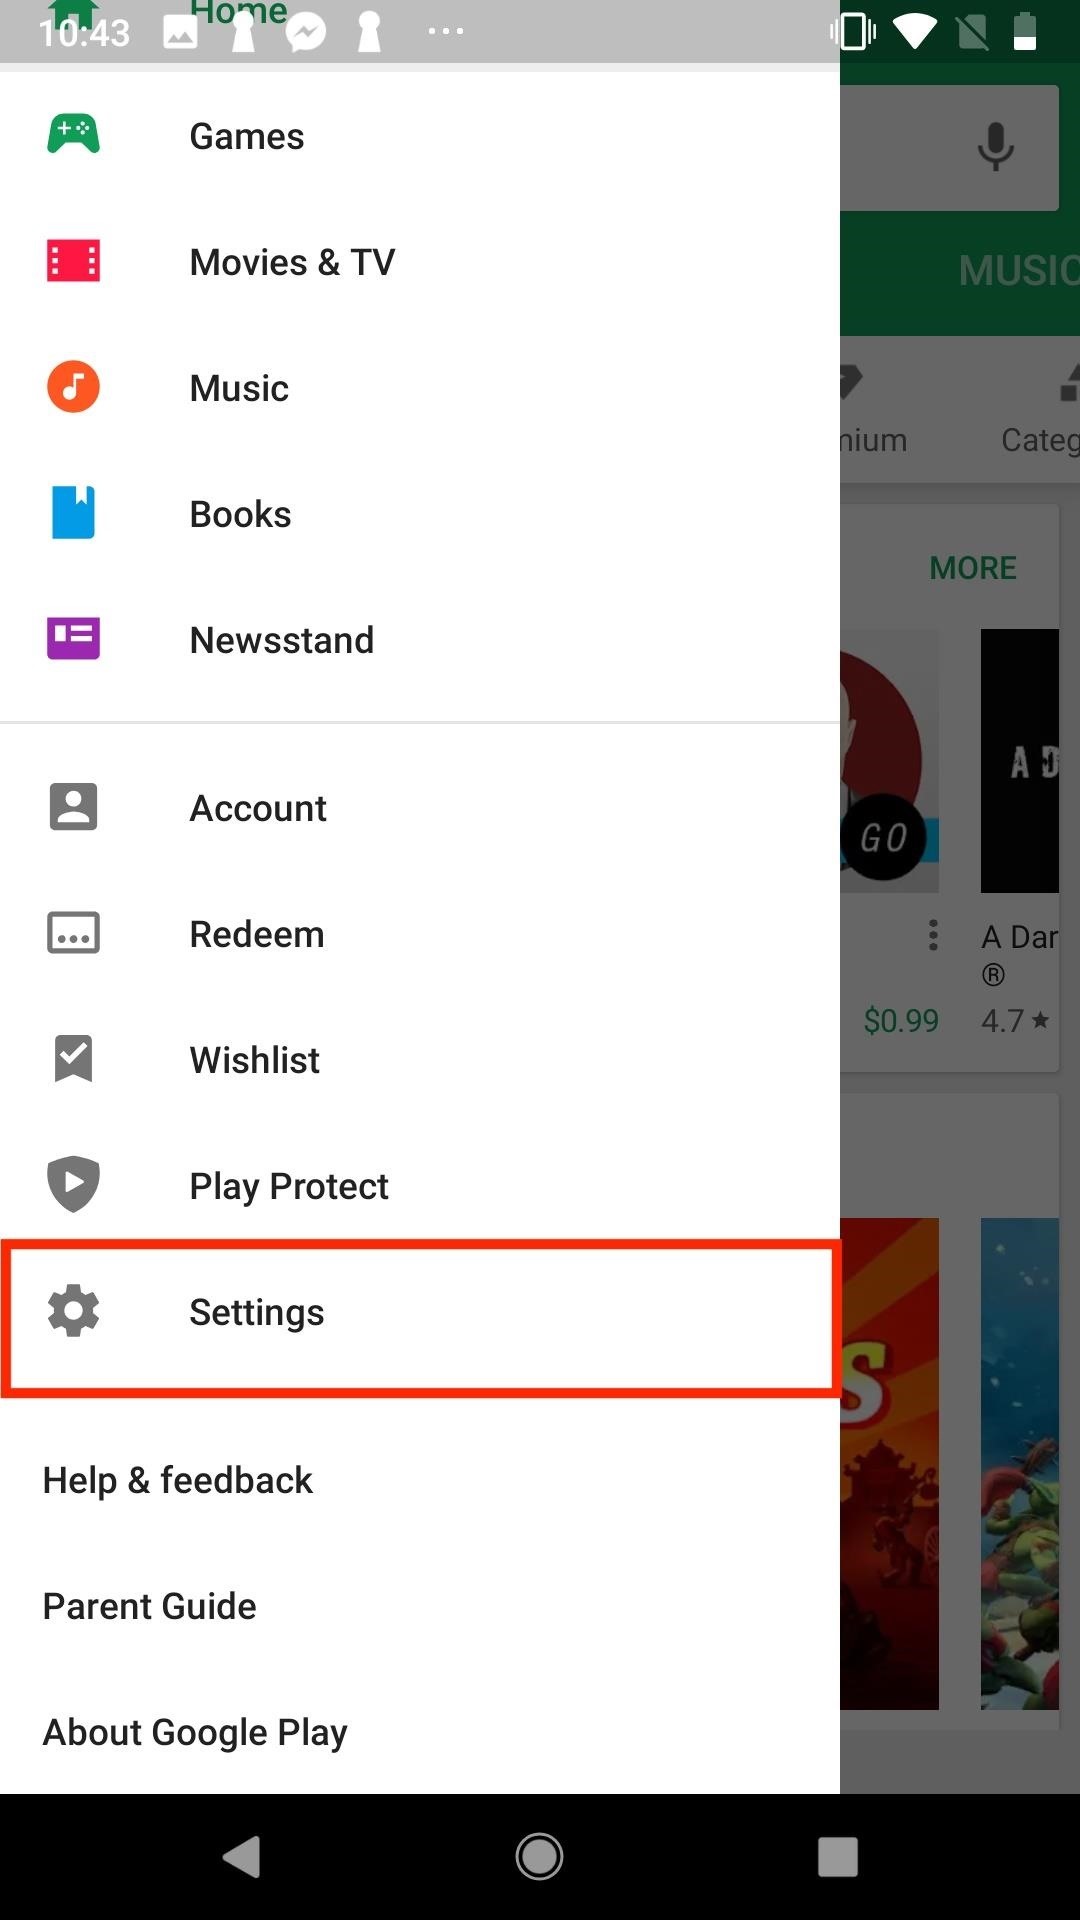 Google Play Instant Apps & Games Not Working? Check These Settings